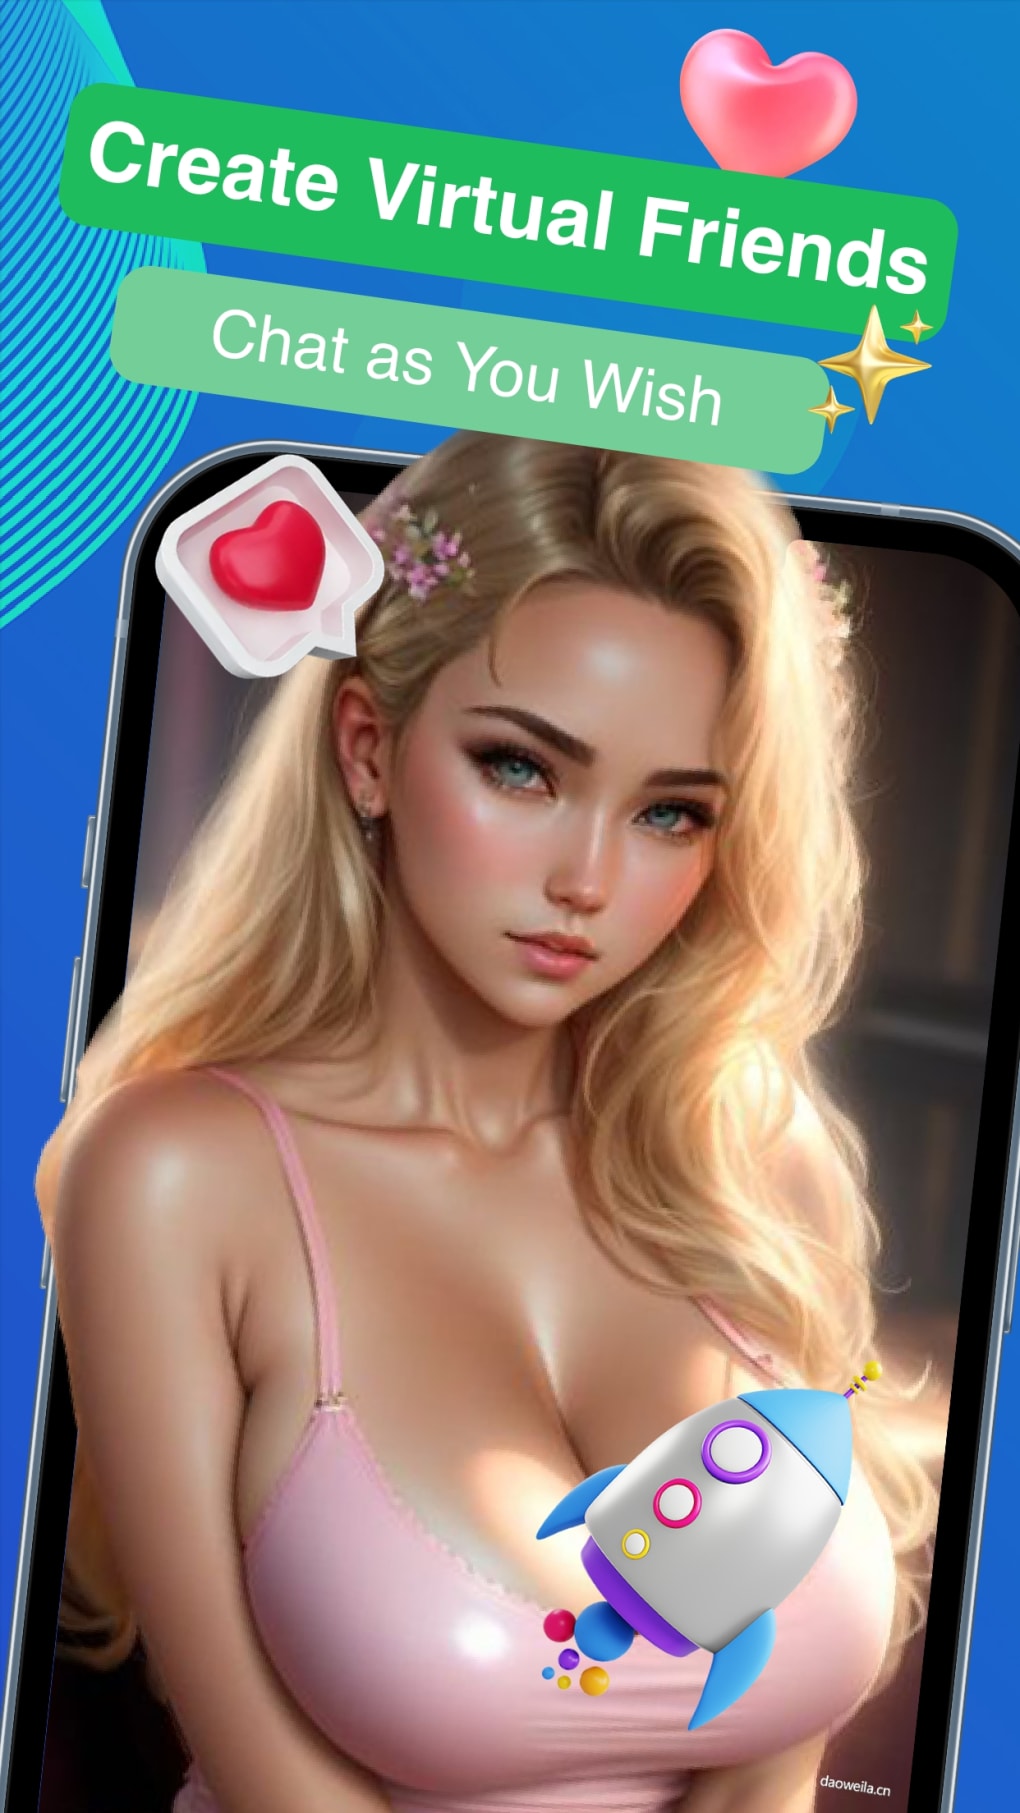 100 percent free AI Lady Creator: Create Primary AI Lady out of Text message